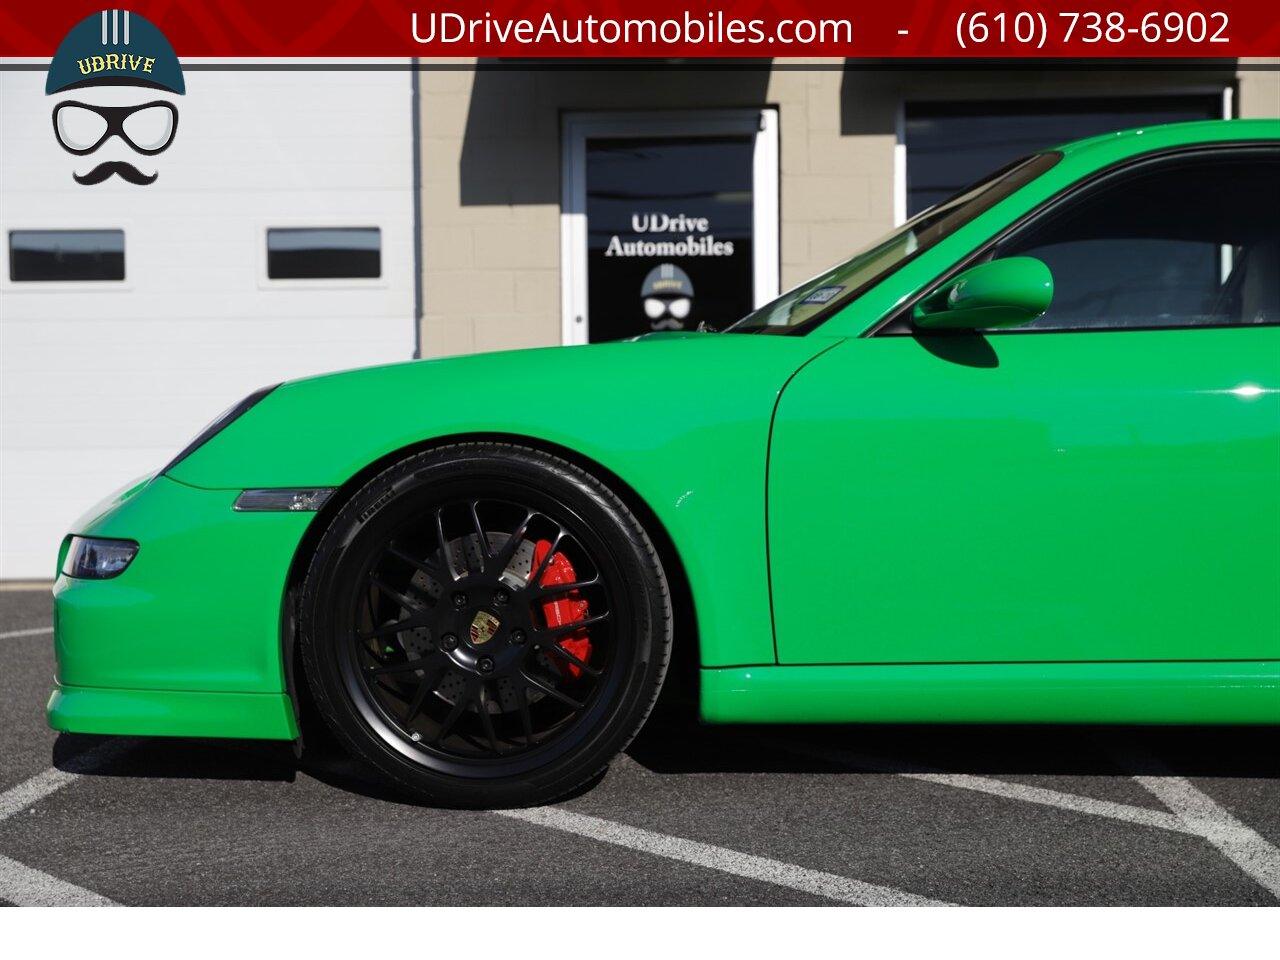 2008 Porsche 911 S 997 6Sp PTS RS Green AeroKit 1of a Kind  $118k MSRP Champion F77 Pkg RG5 Whls - Photo 10 - West Chester, PA 19382